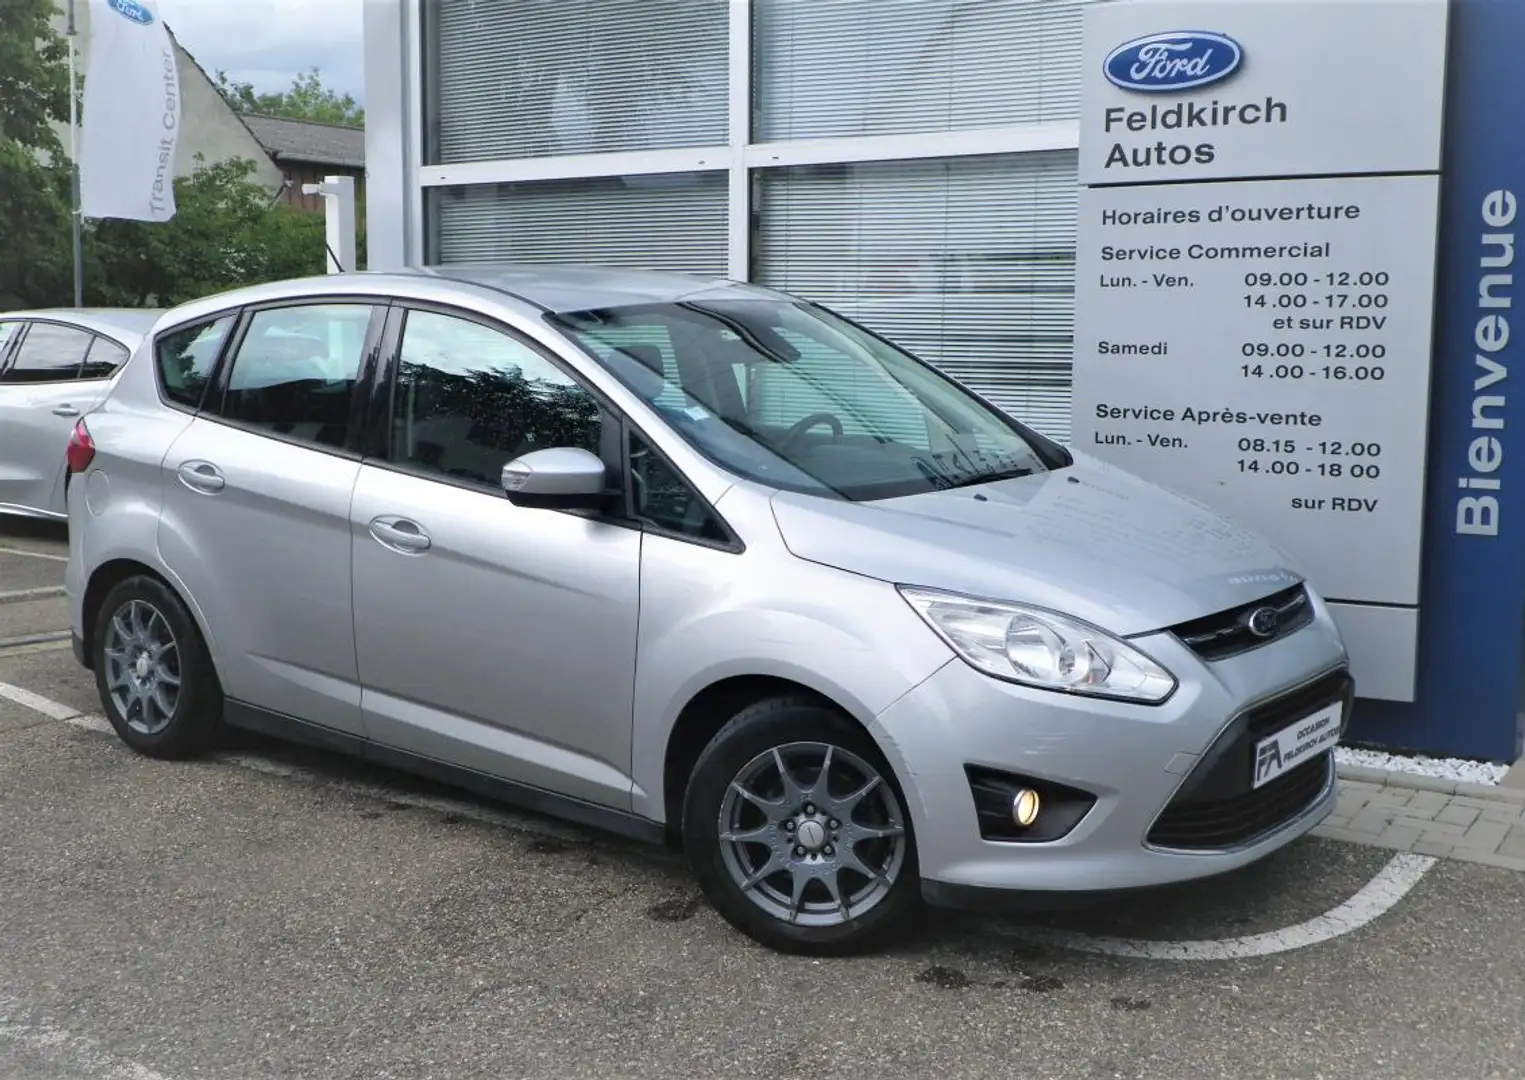 Ford C-Max II 1.6 TDCI 115 BV6 EDITION Gris - 1